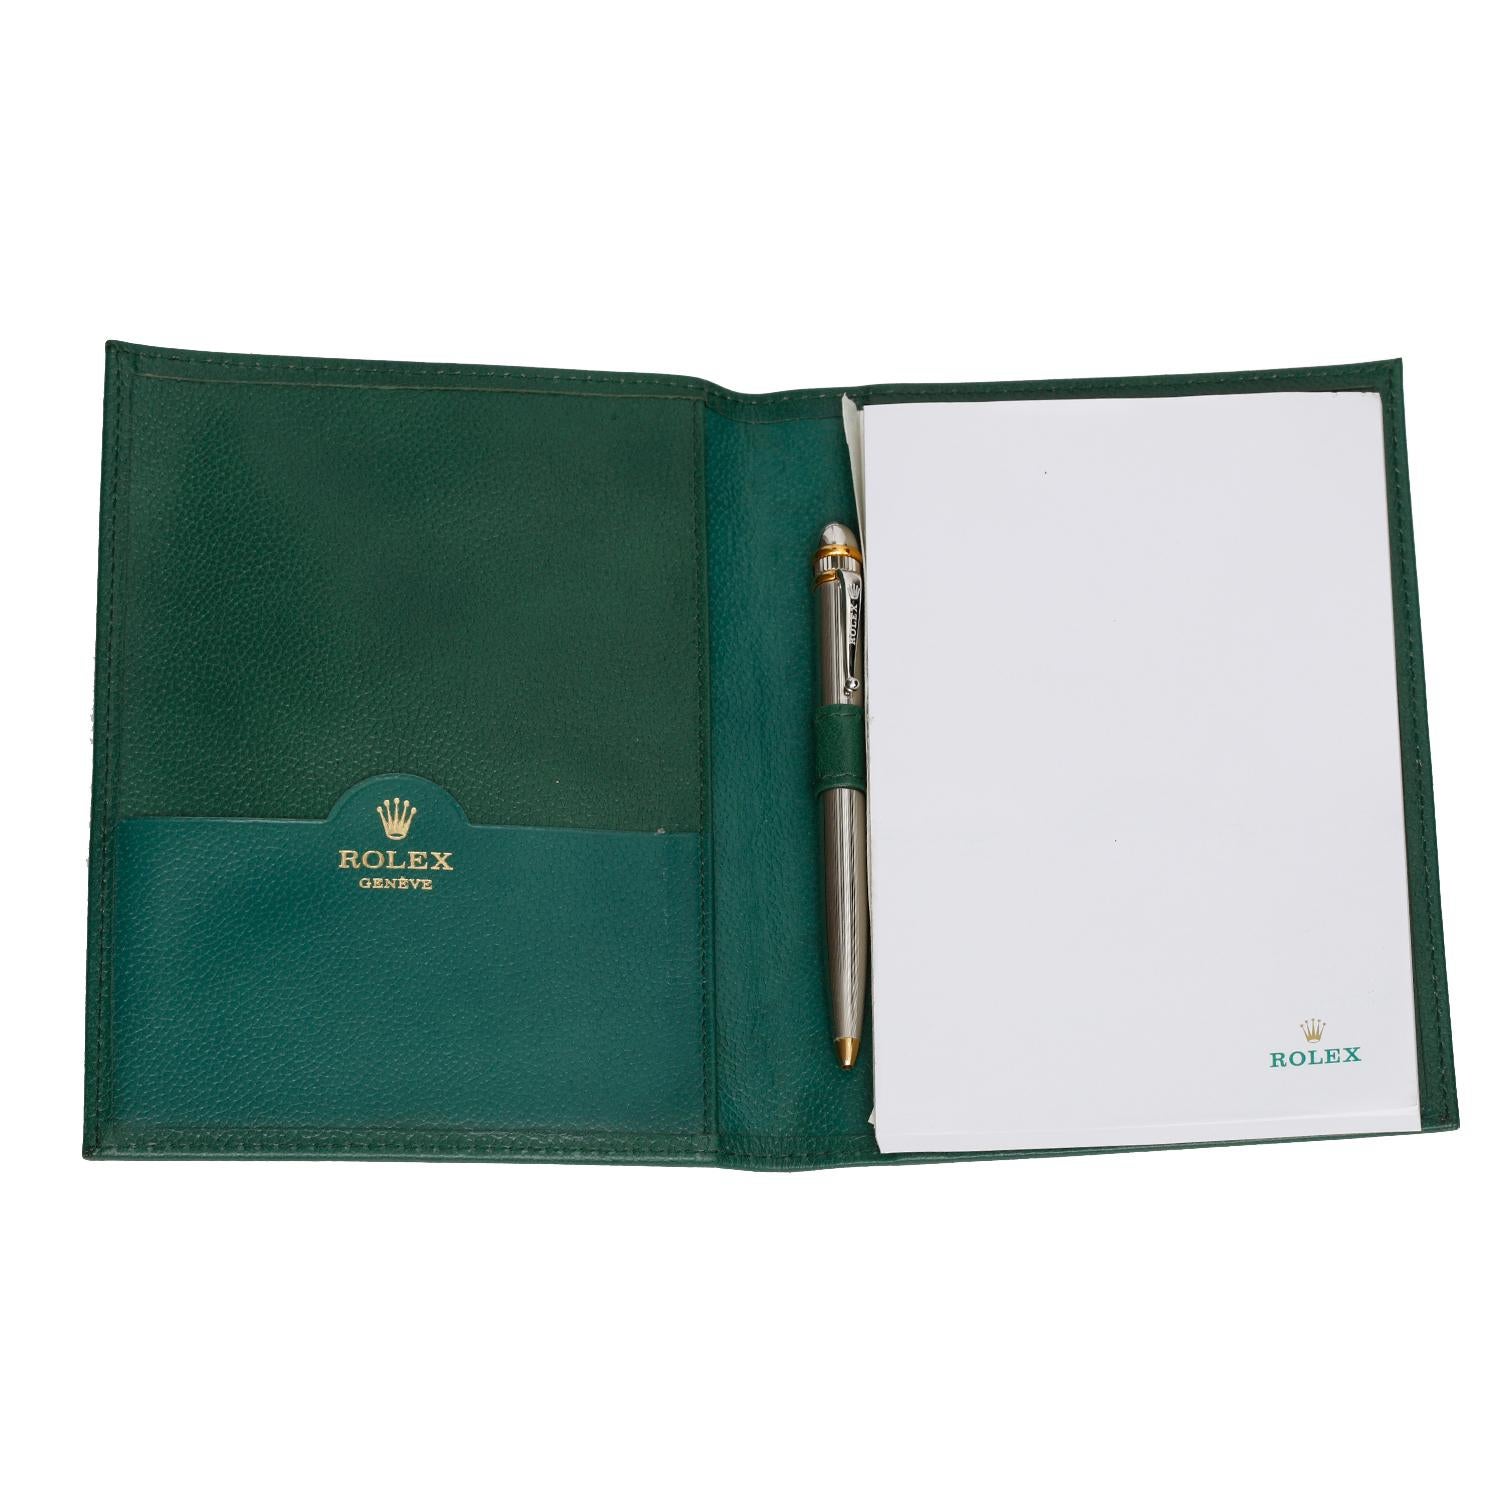 Rolex Green Leather Notepad with Two tone Rolex pen  - Brand new Rolex notepad w